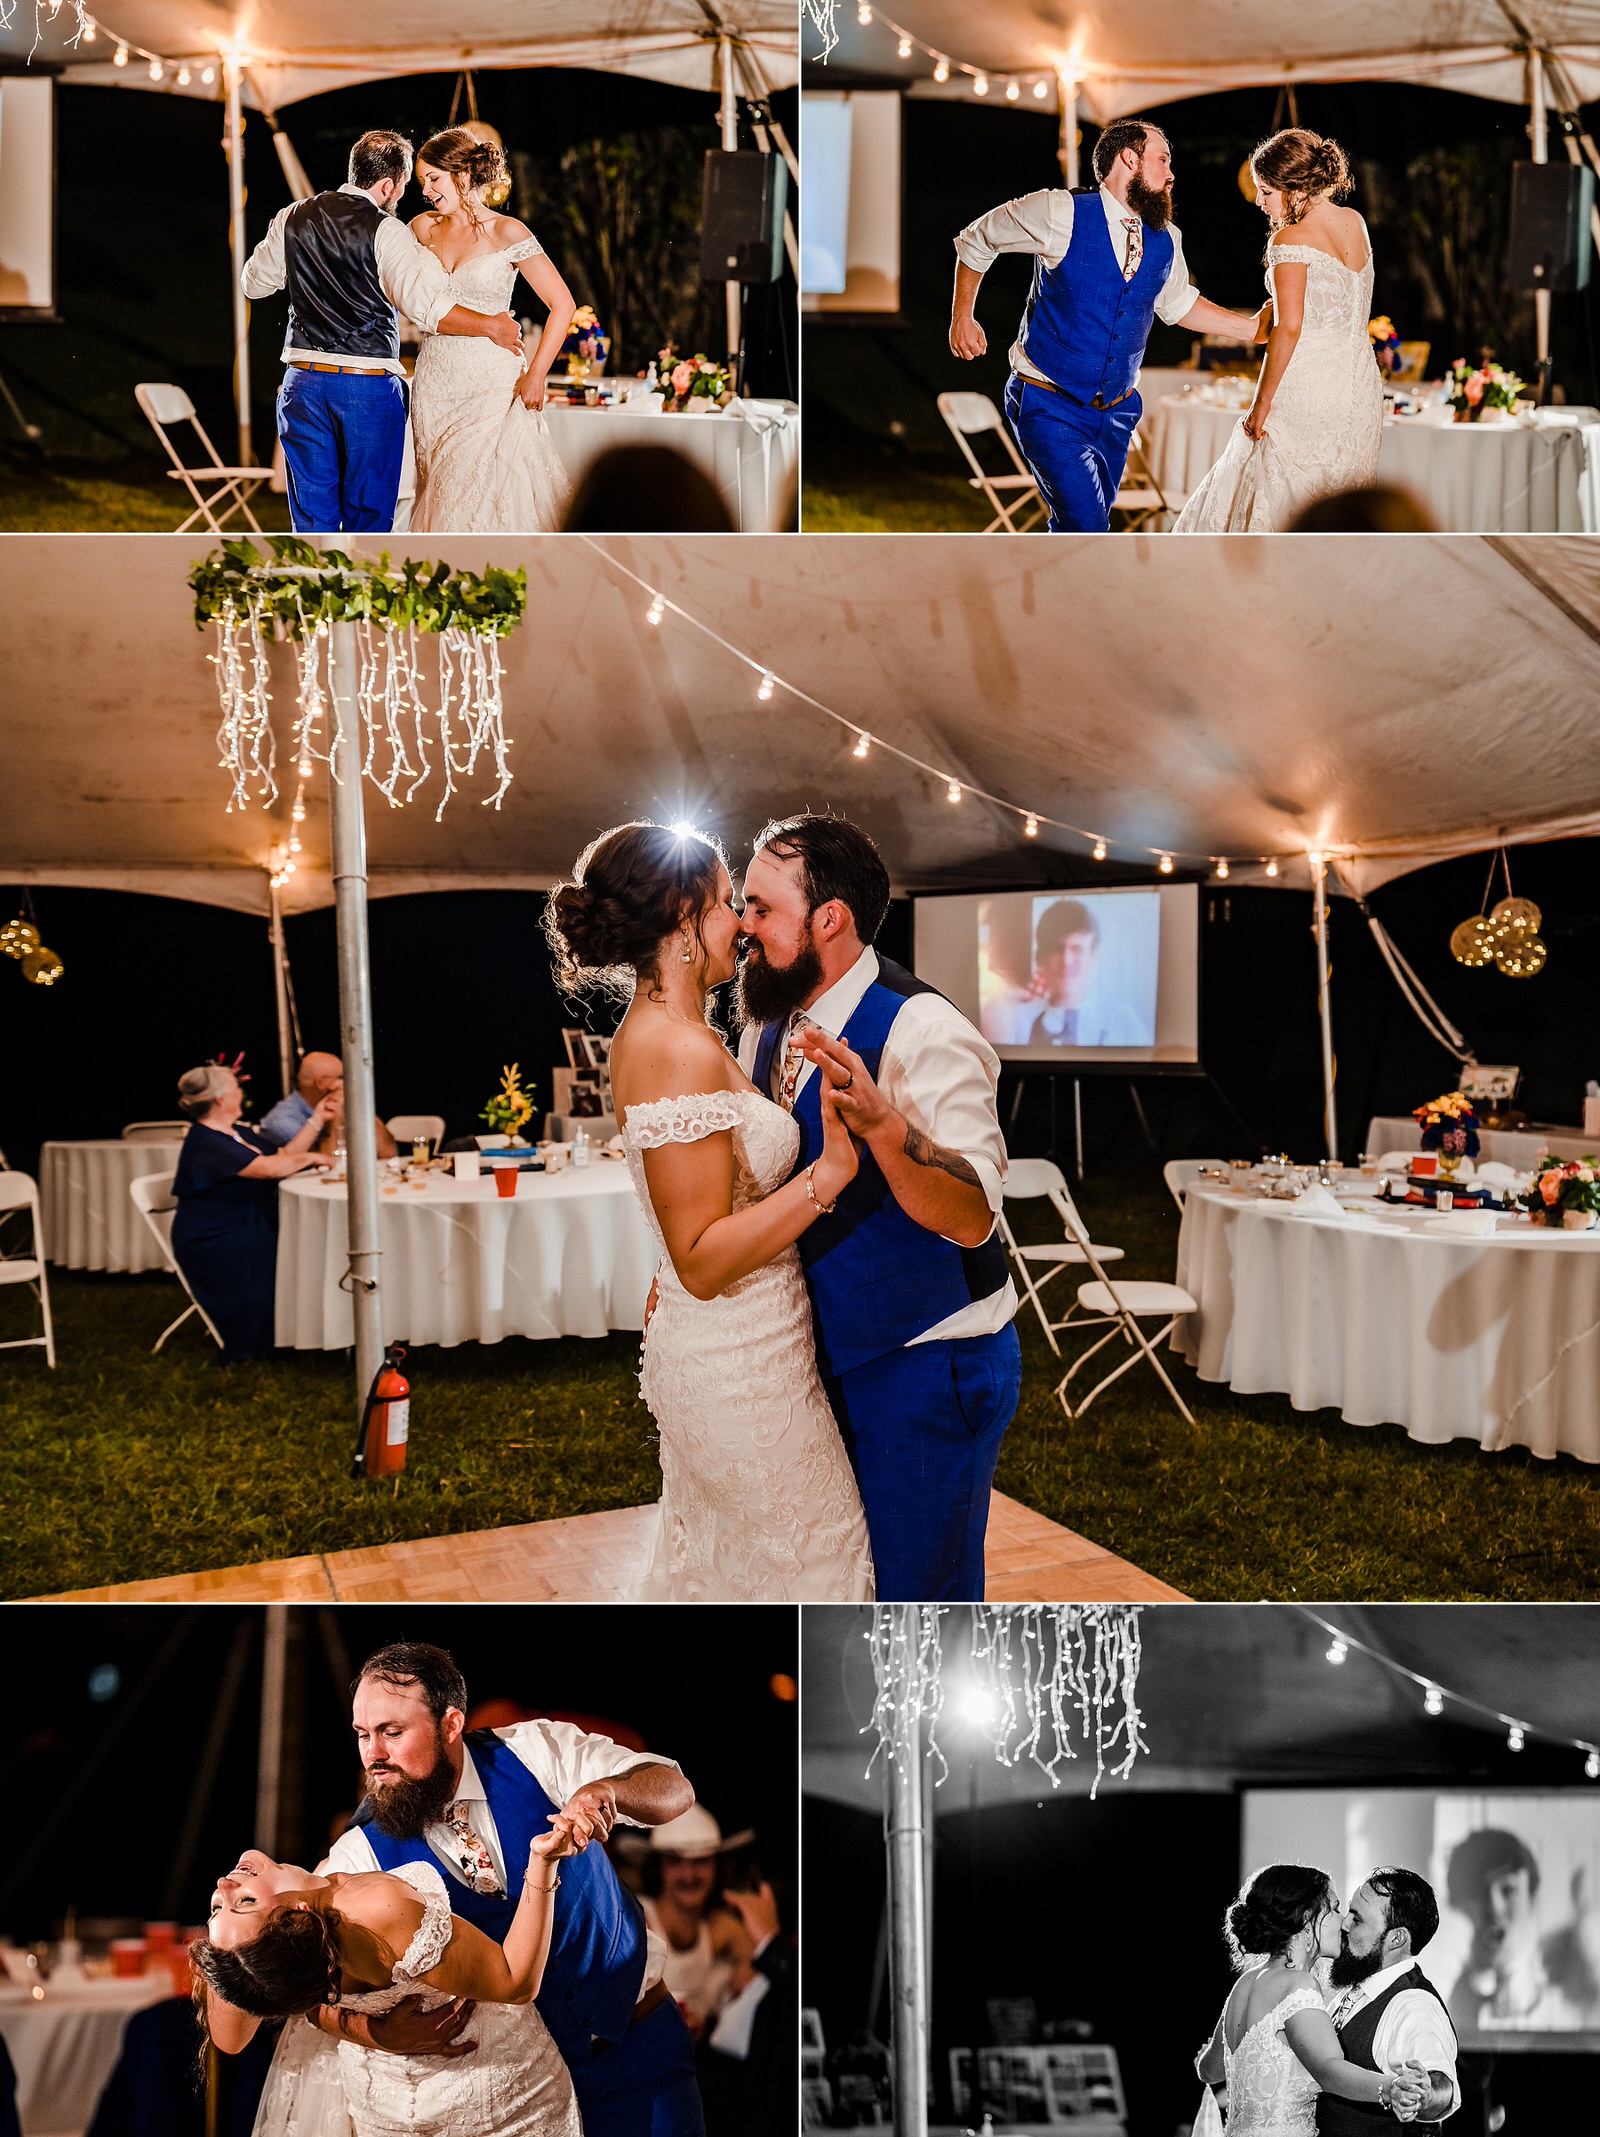 Bride and groom's first dance with projection of groom lip-syncing behind them